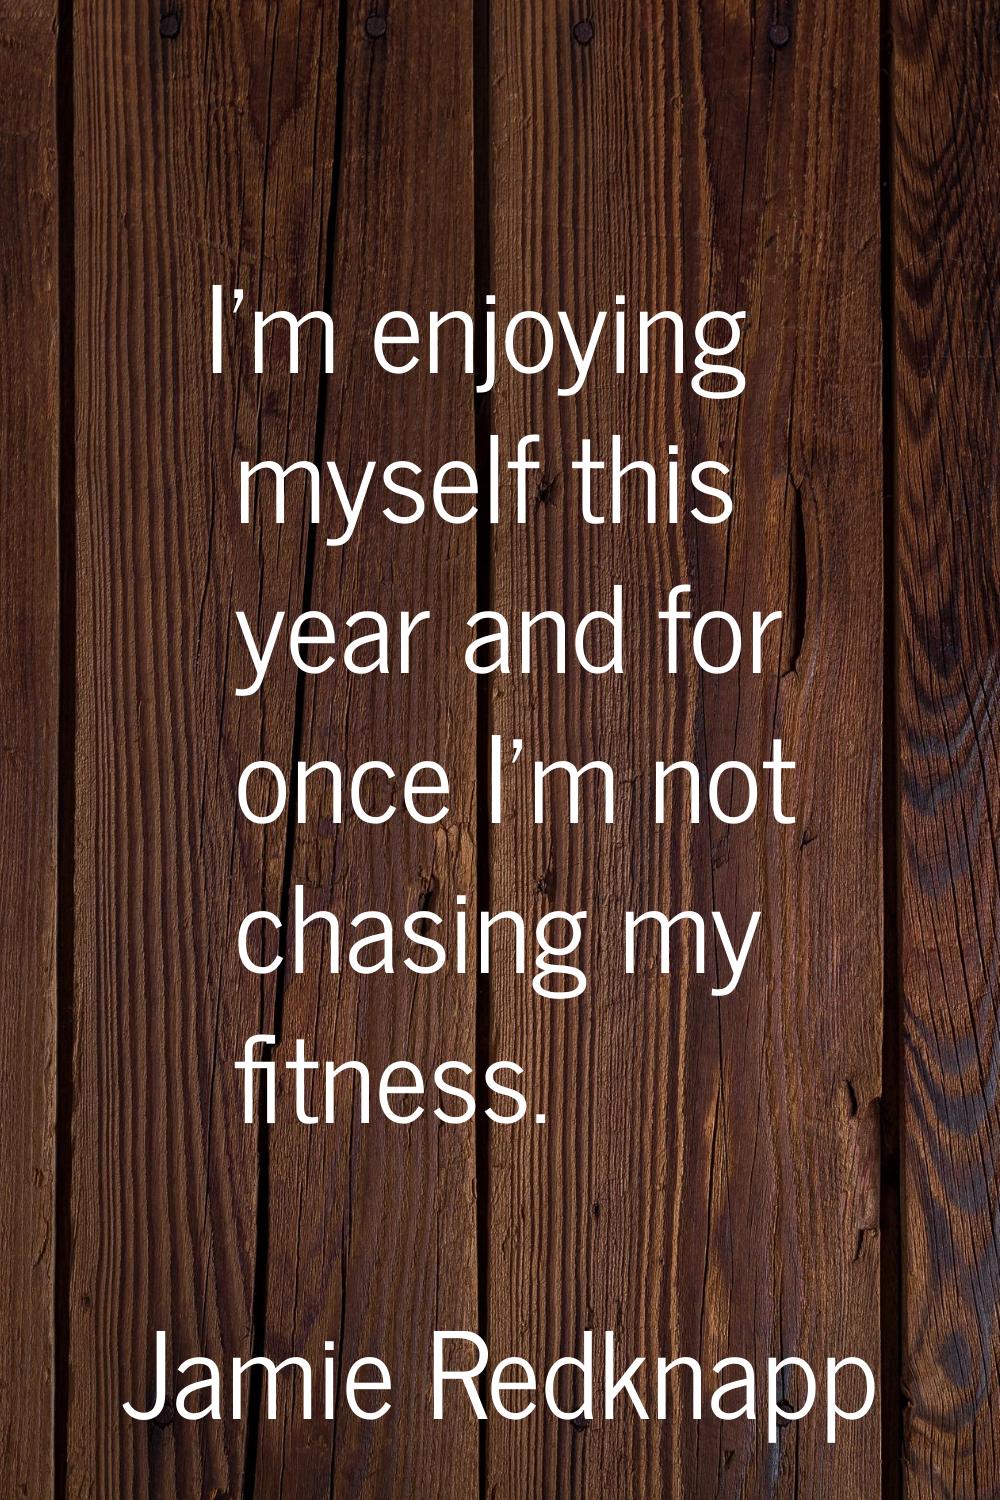 I'm enjoying myself this year and for once I'm not chasing my fitness.